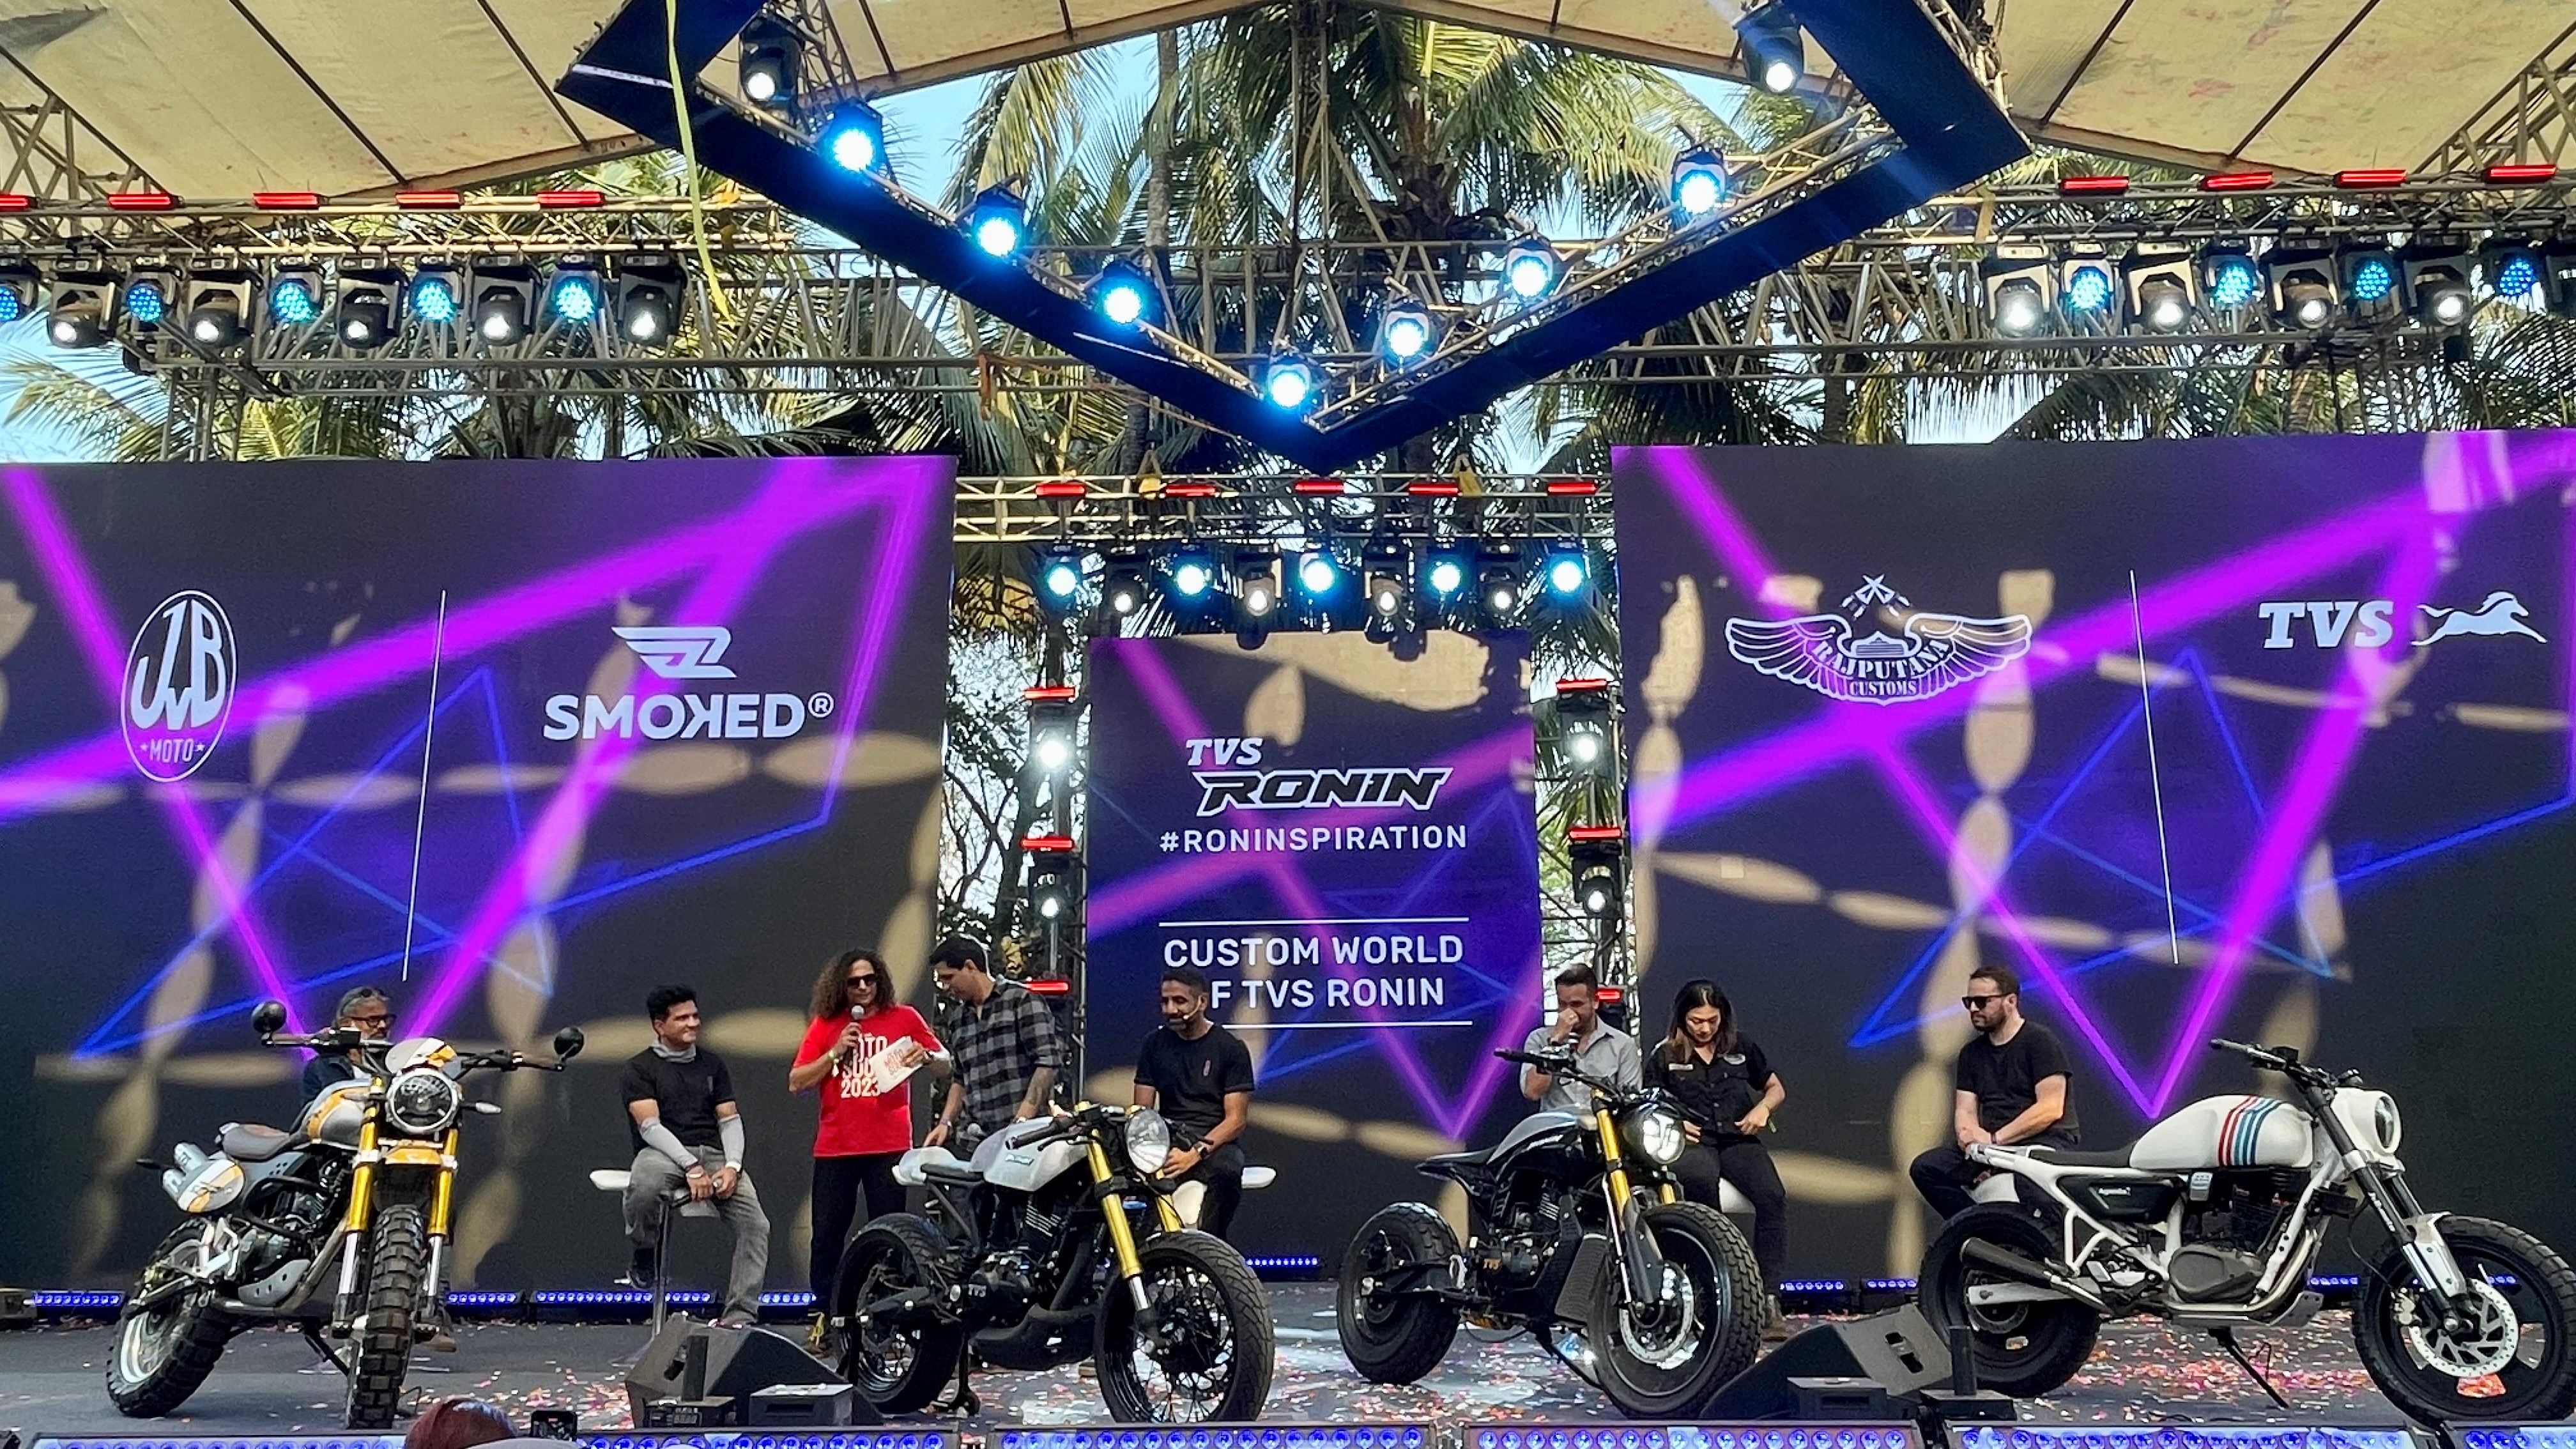 tvs-motosoul-successfully-concludes-day-1-with-customisation-on-tvs-ronin-showcases-4-custom-builds-and-flat-track-experience